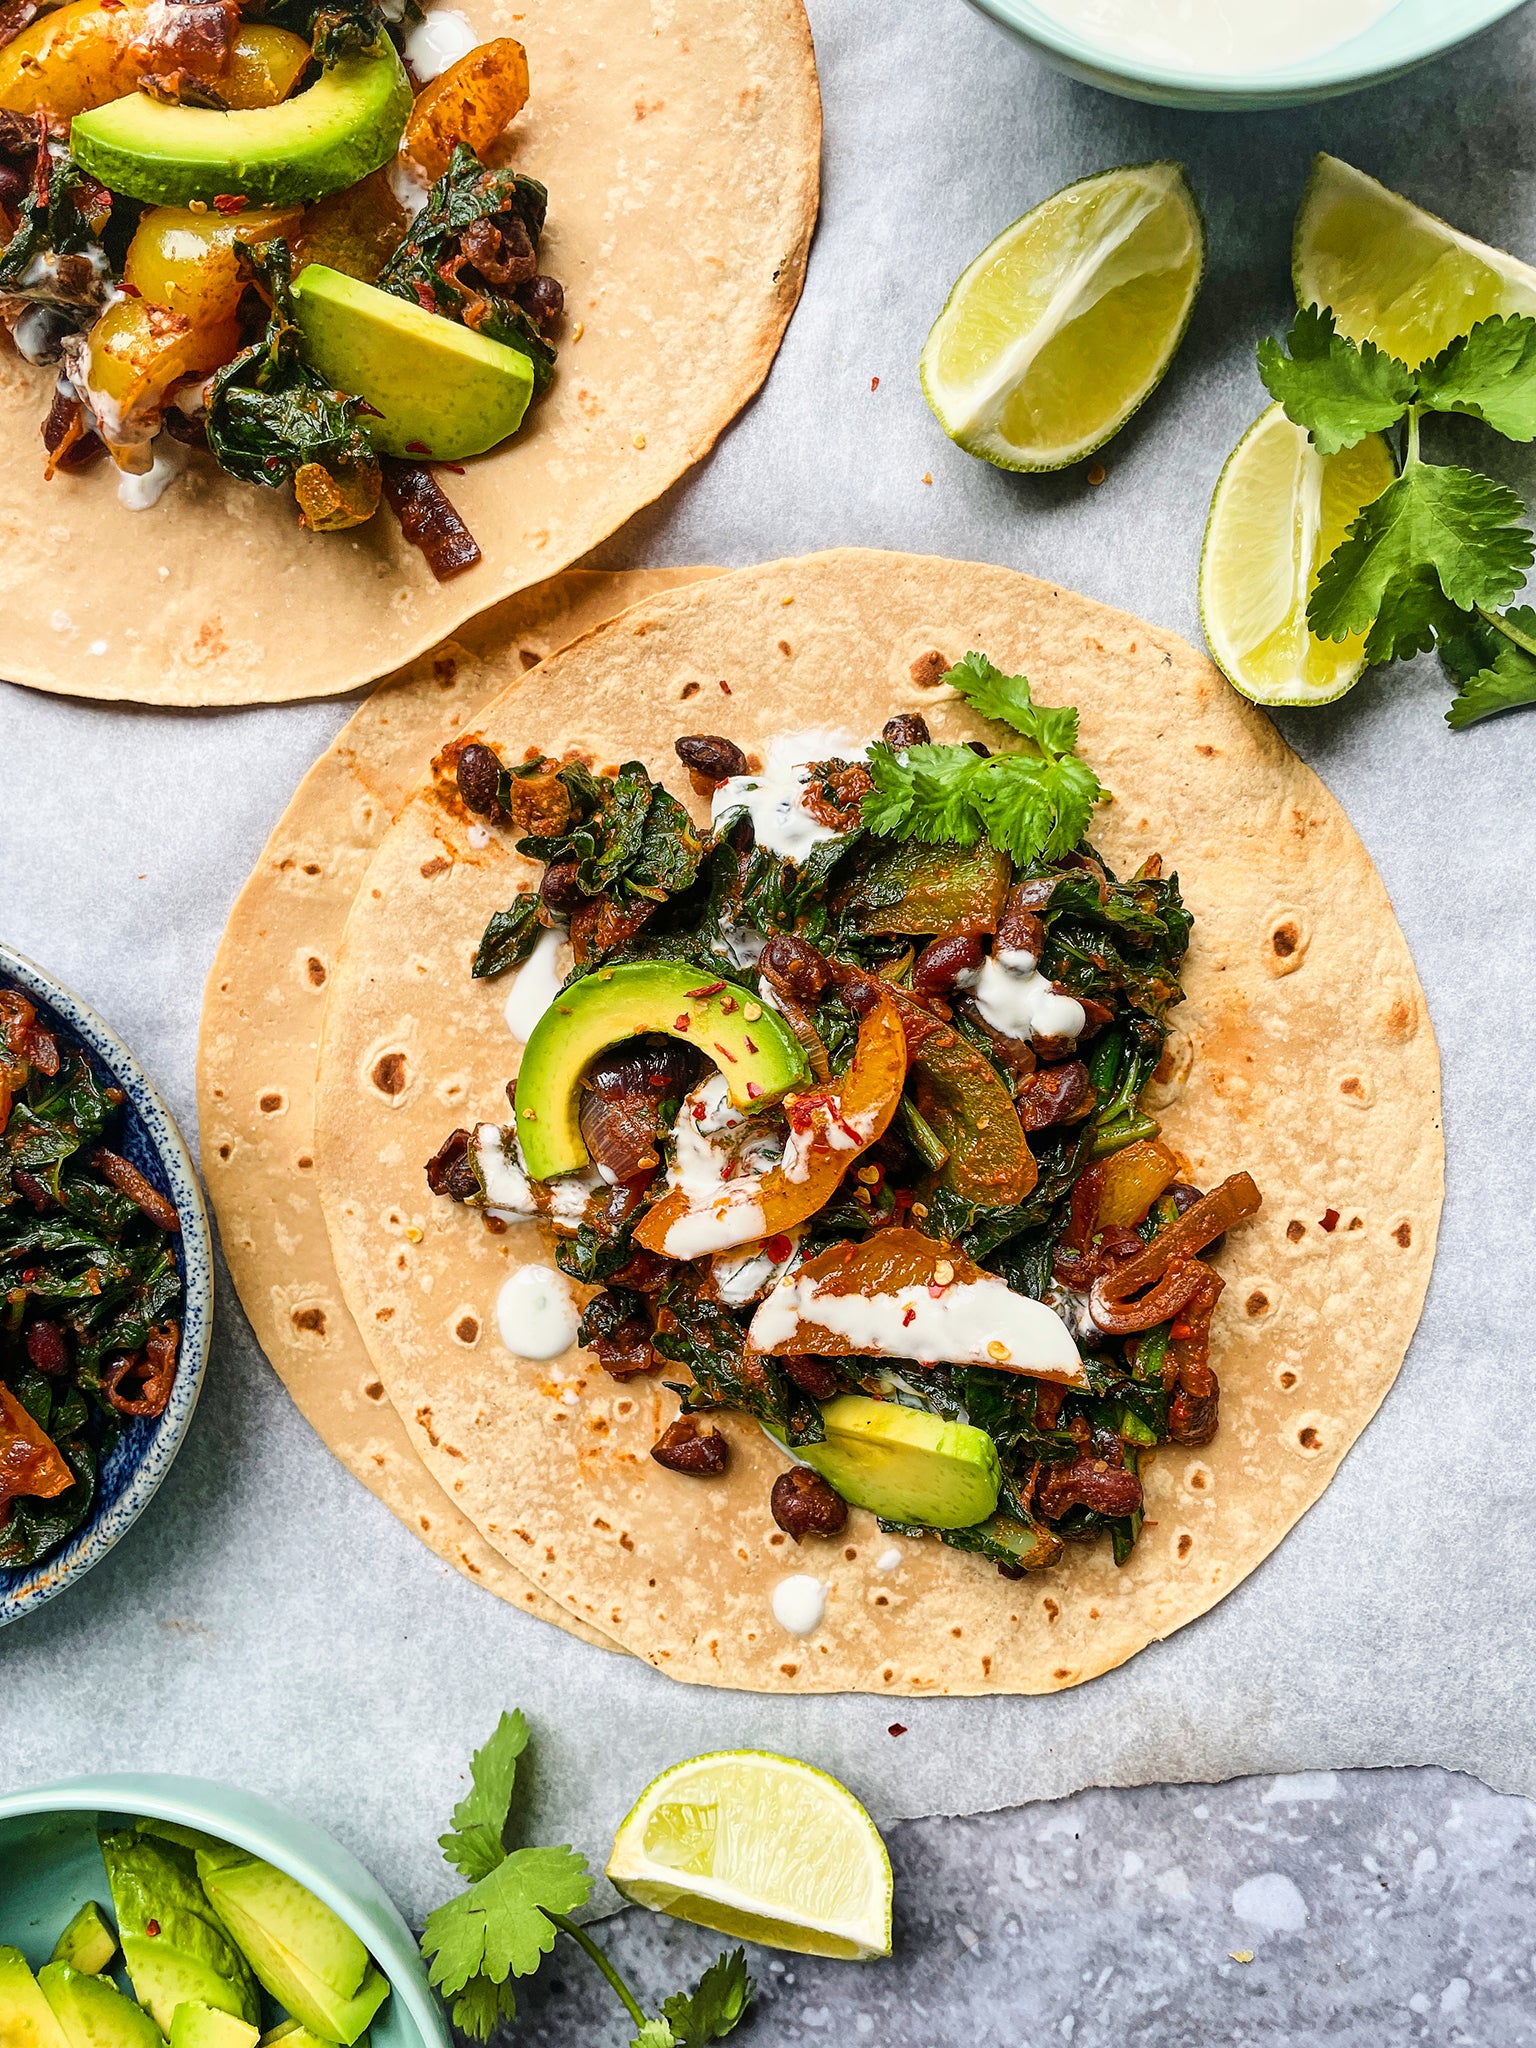 Made with black beans and juicy avocados, these fajitas are vegetarian-friendly and a source of fiber and protein.